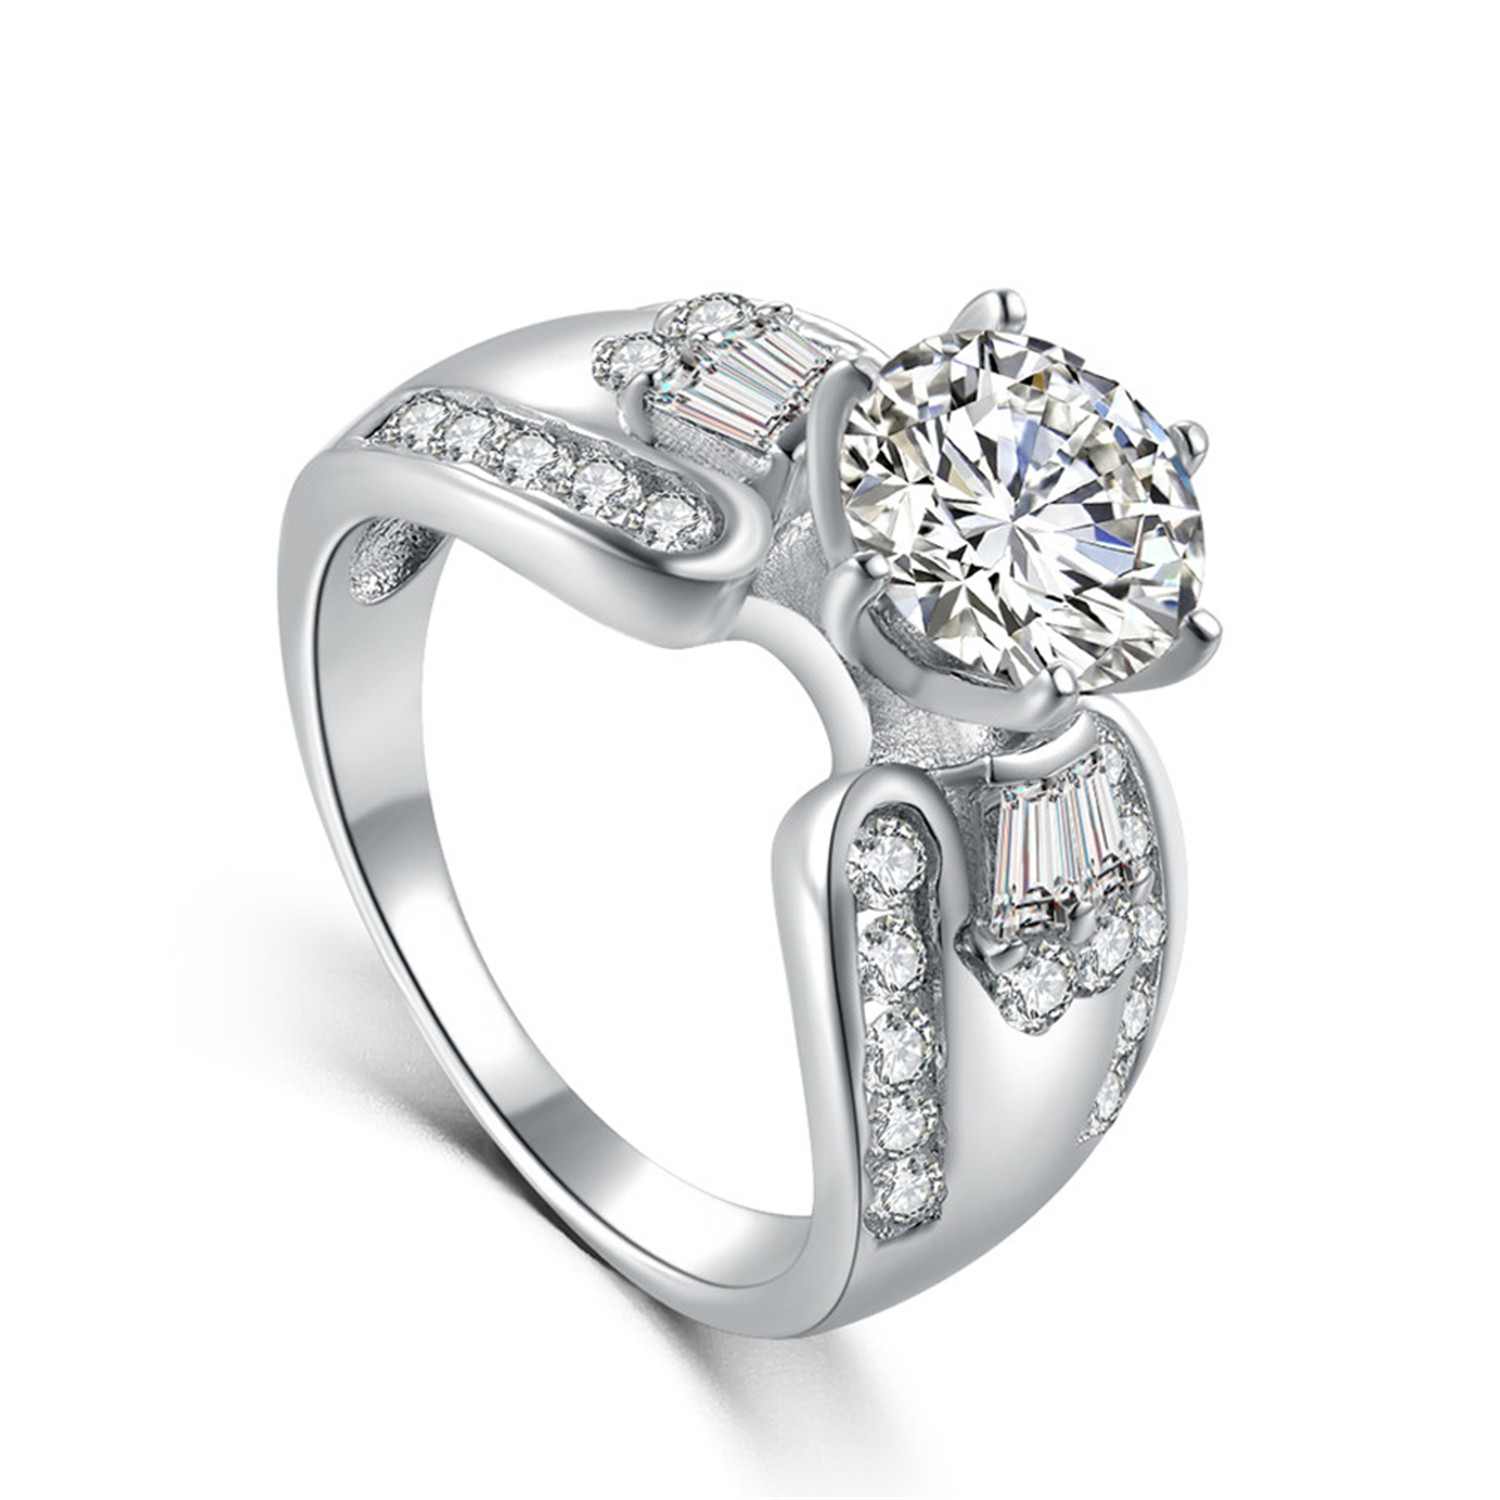 Hot sale 925 sterling Silver ring with CZ stone wedding jewelry for women(图1)